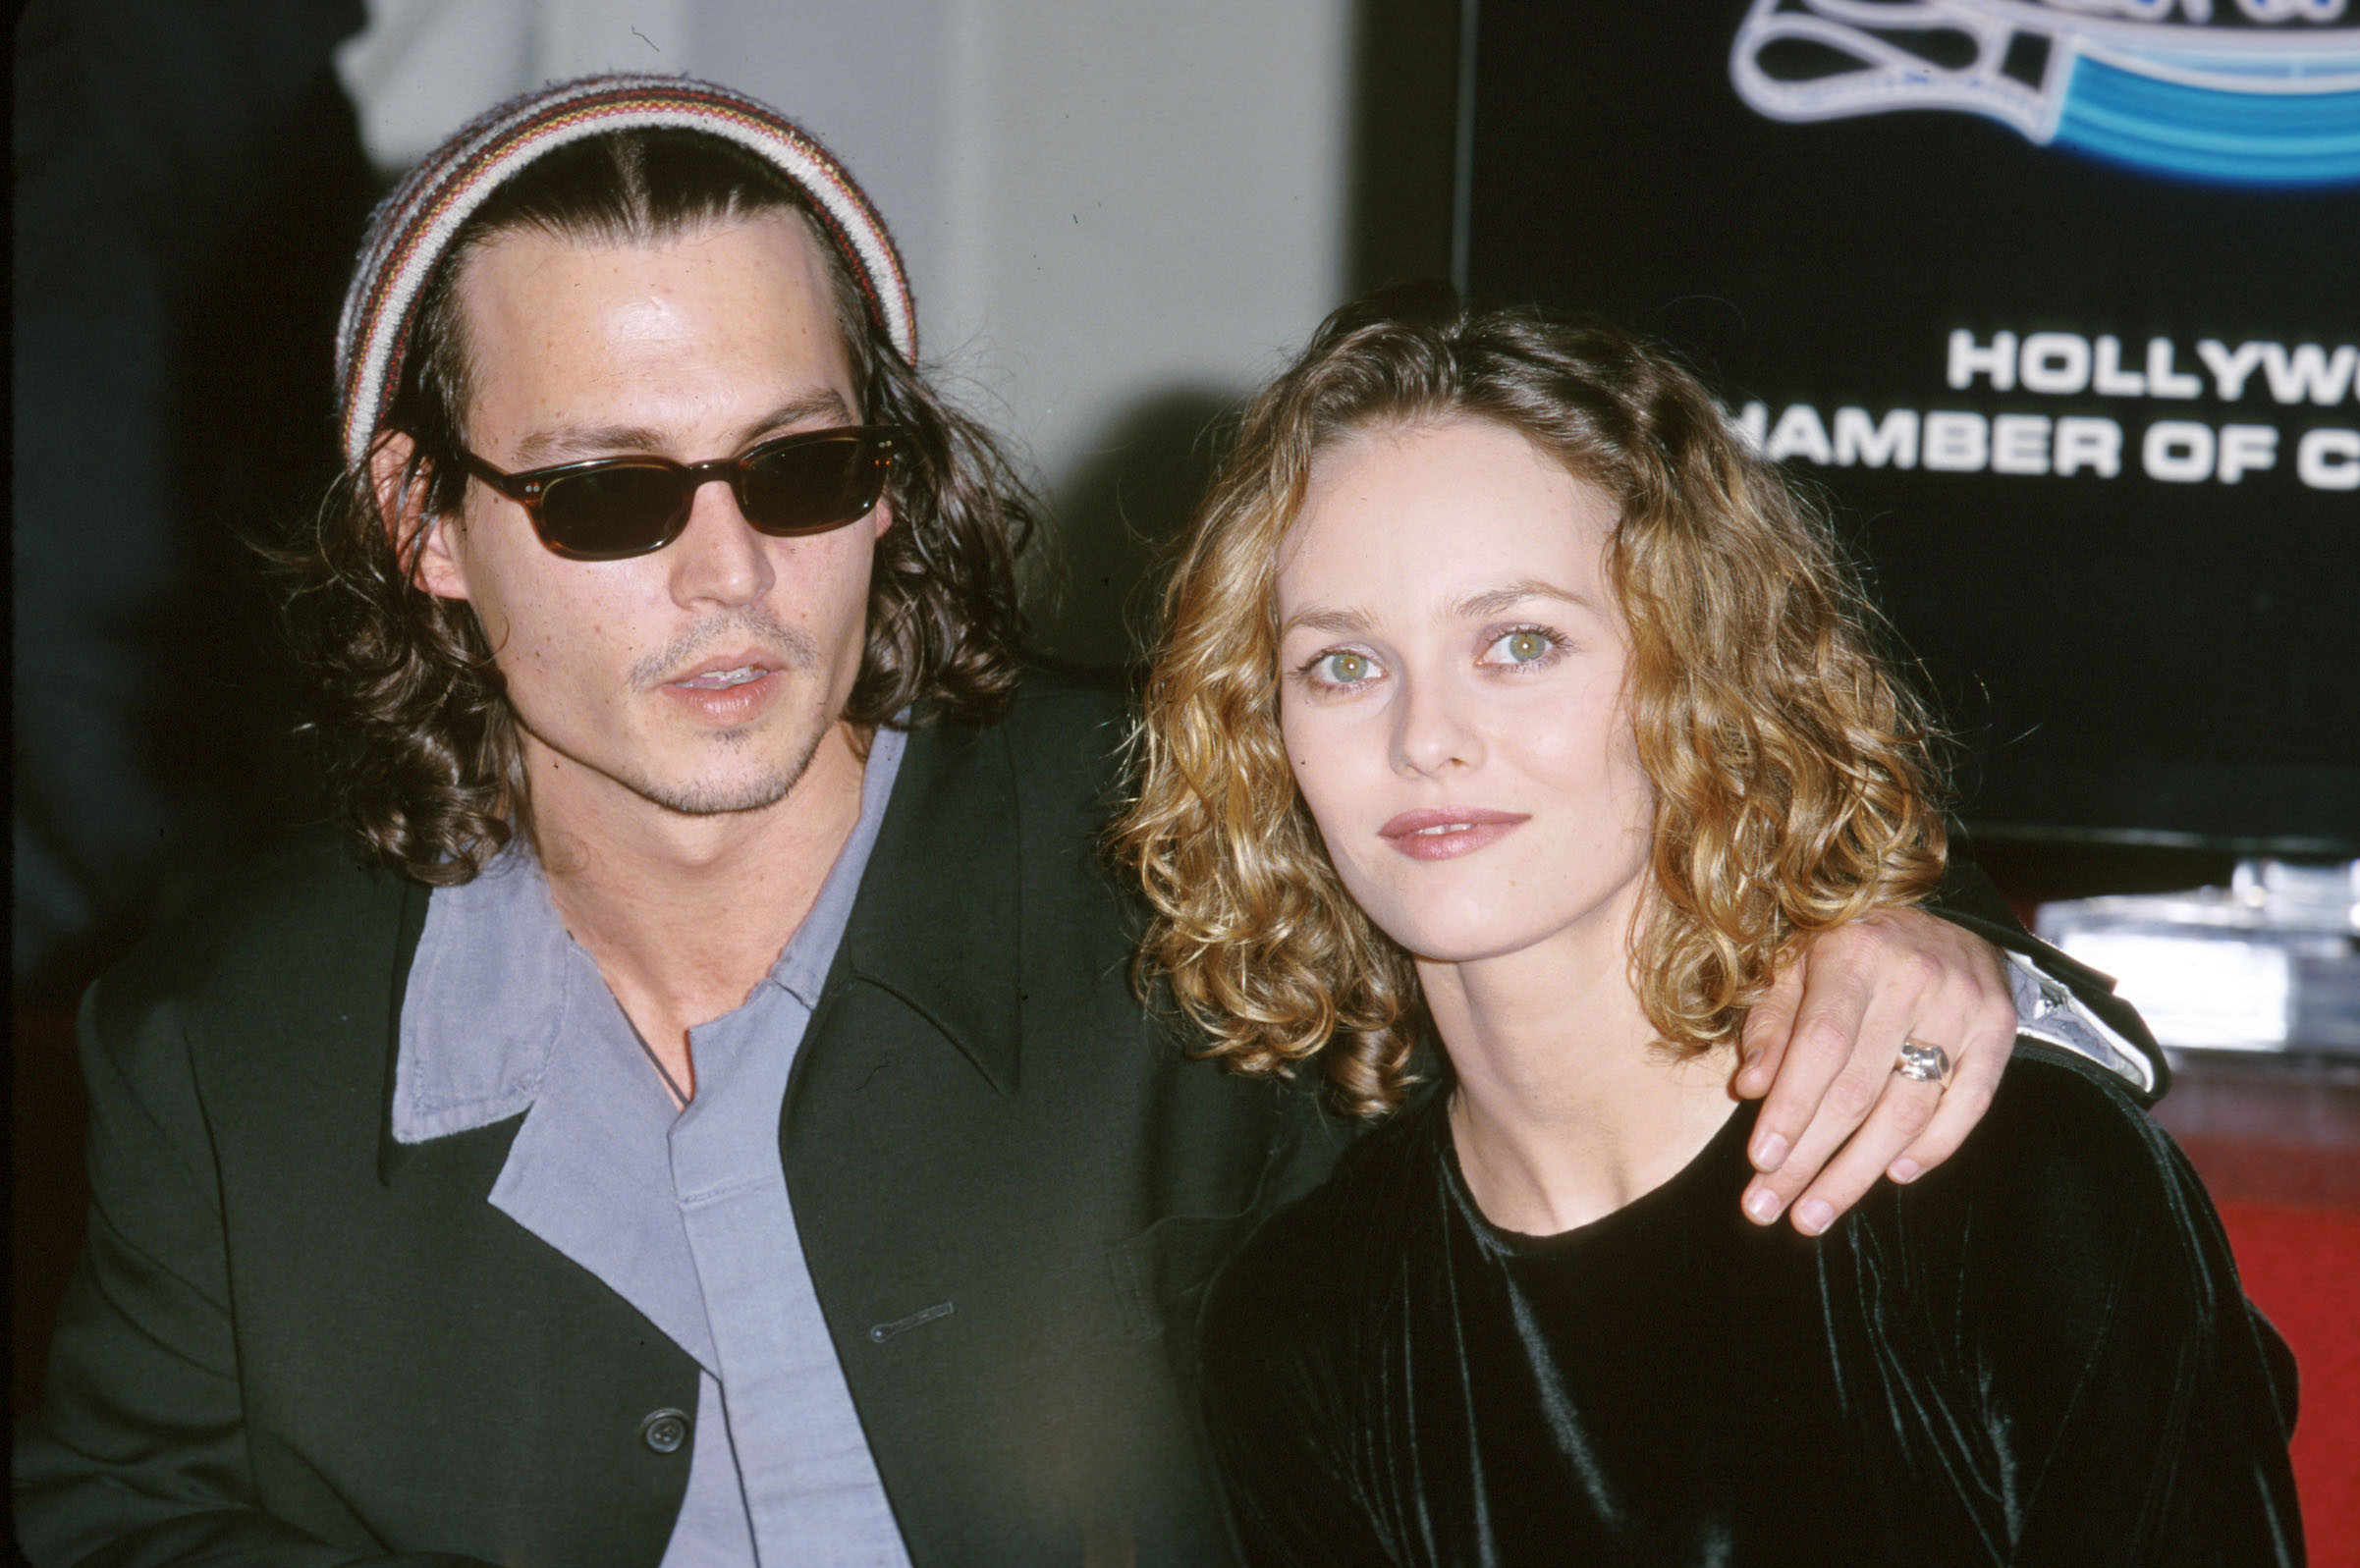 Johnny Depp and Vanessa Paradis at Hollywood Boulevard in California on November 16, 1999 | Source: Getty Images